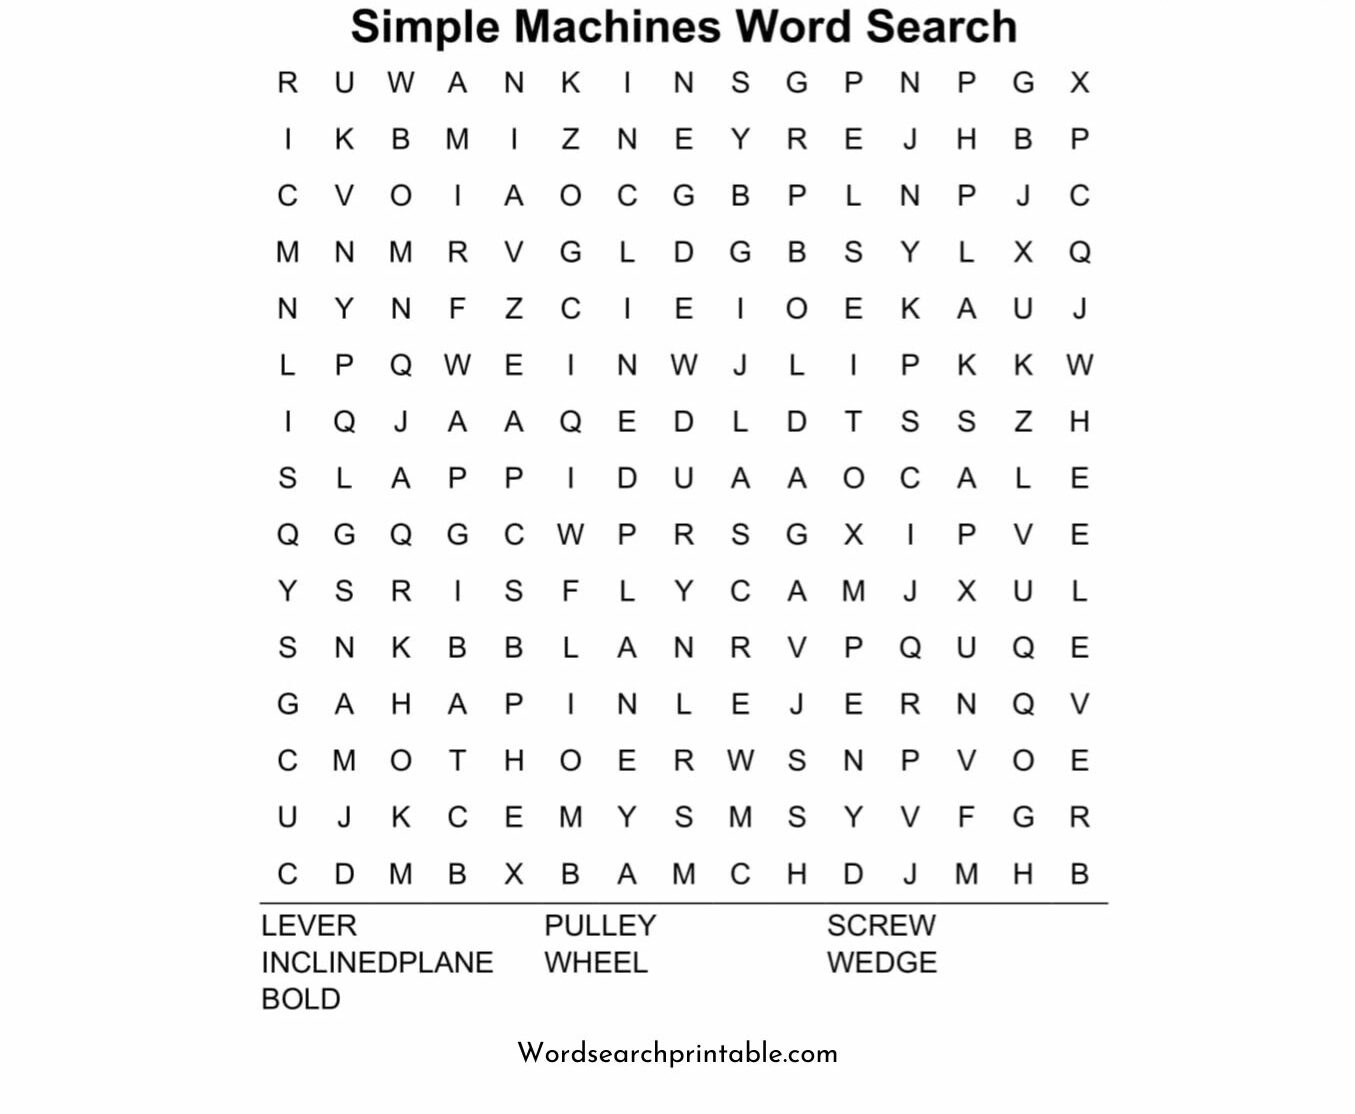 simple machines word search puzzle